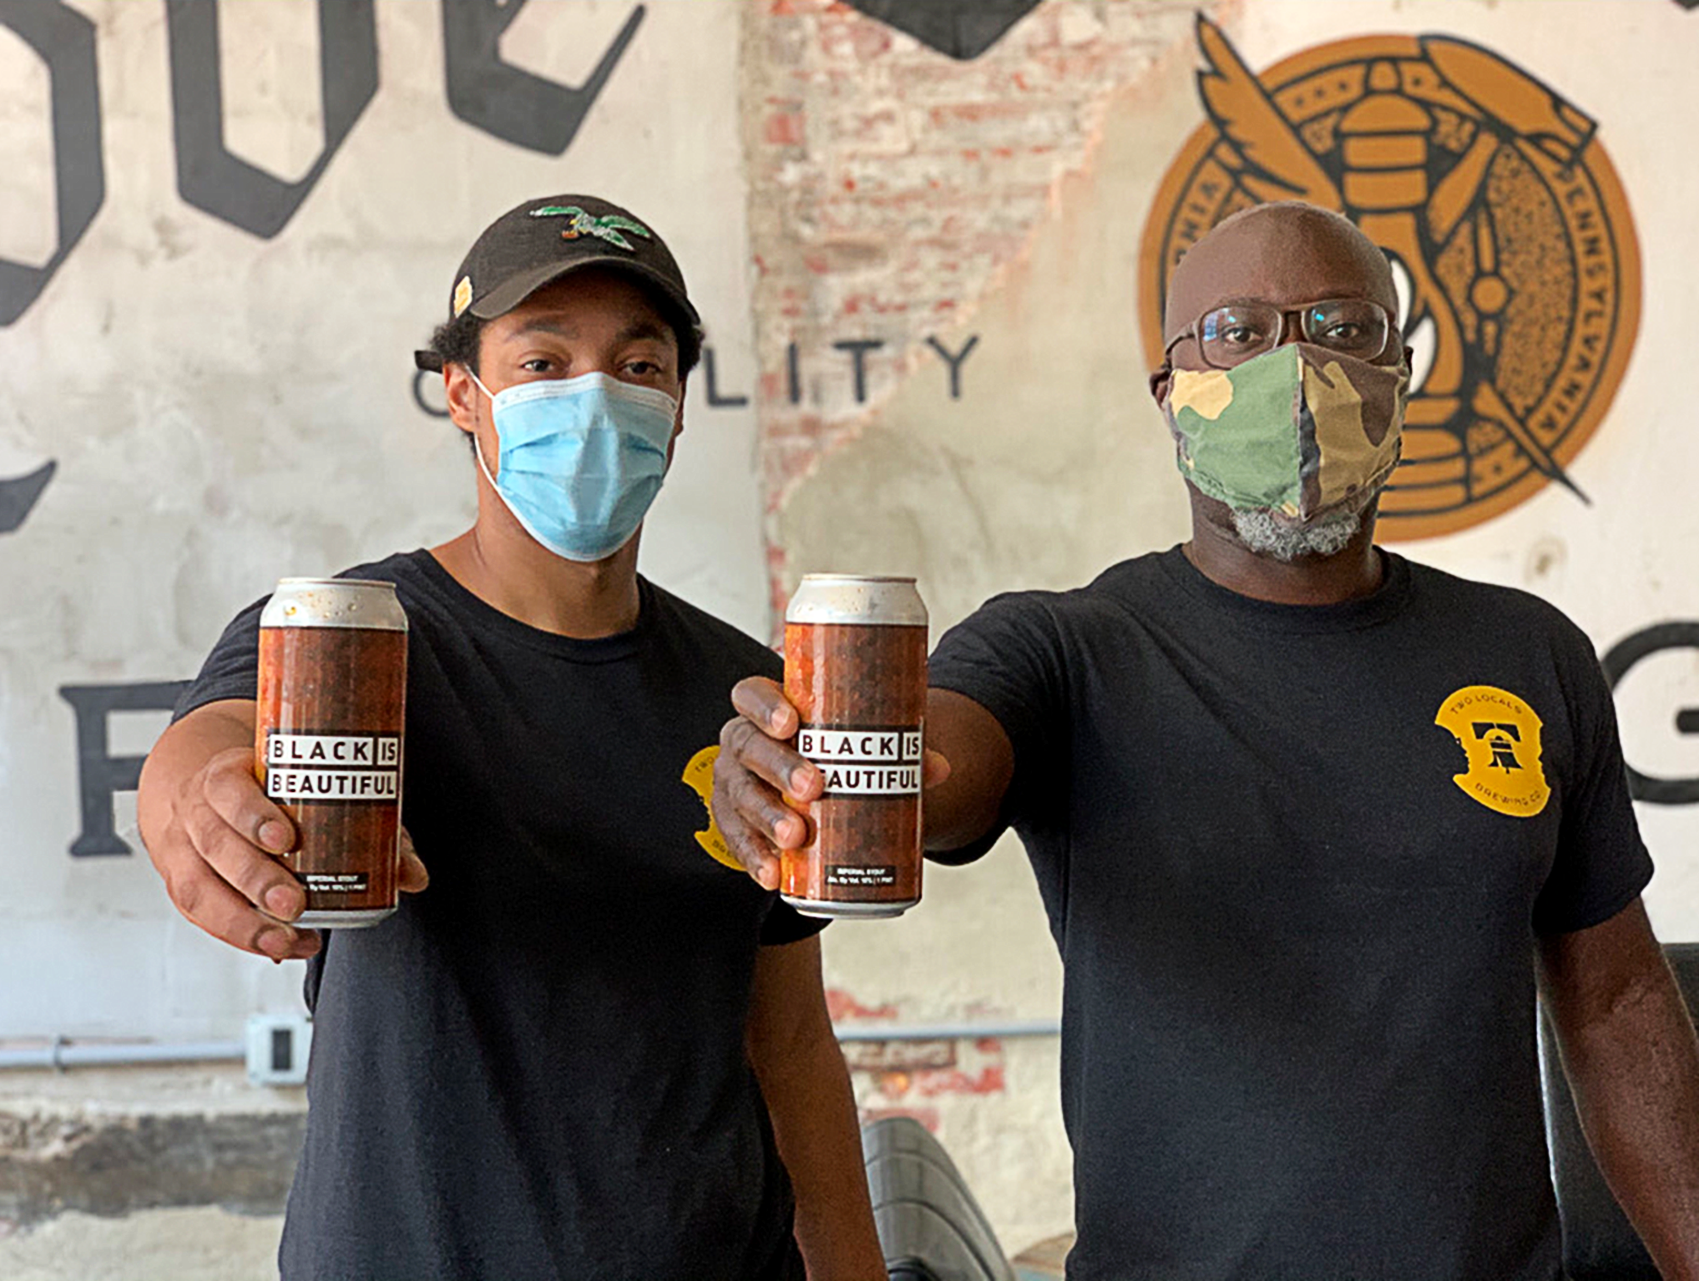 Brothers Rich (left) and Mengistu Koilor pose with their Black is Beautiful beer. Photograph courtesy of Two Locals Brewing Company.